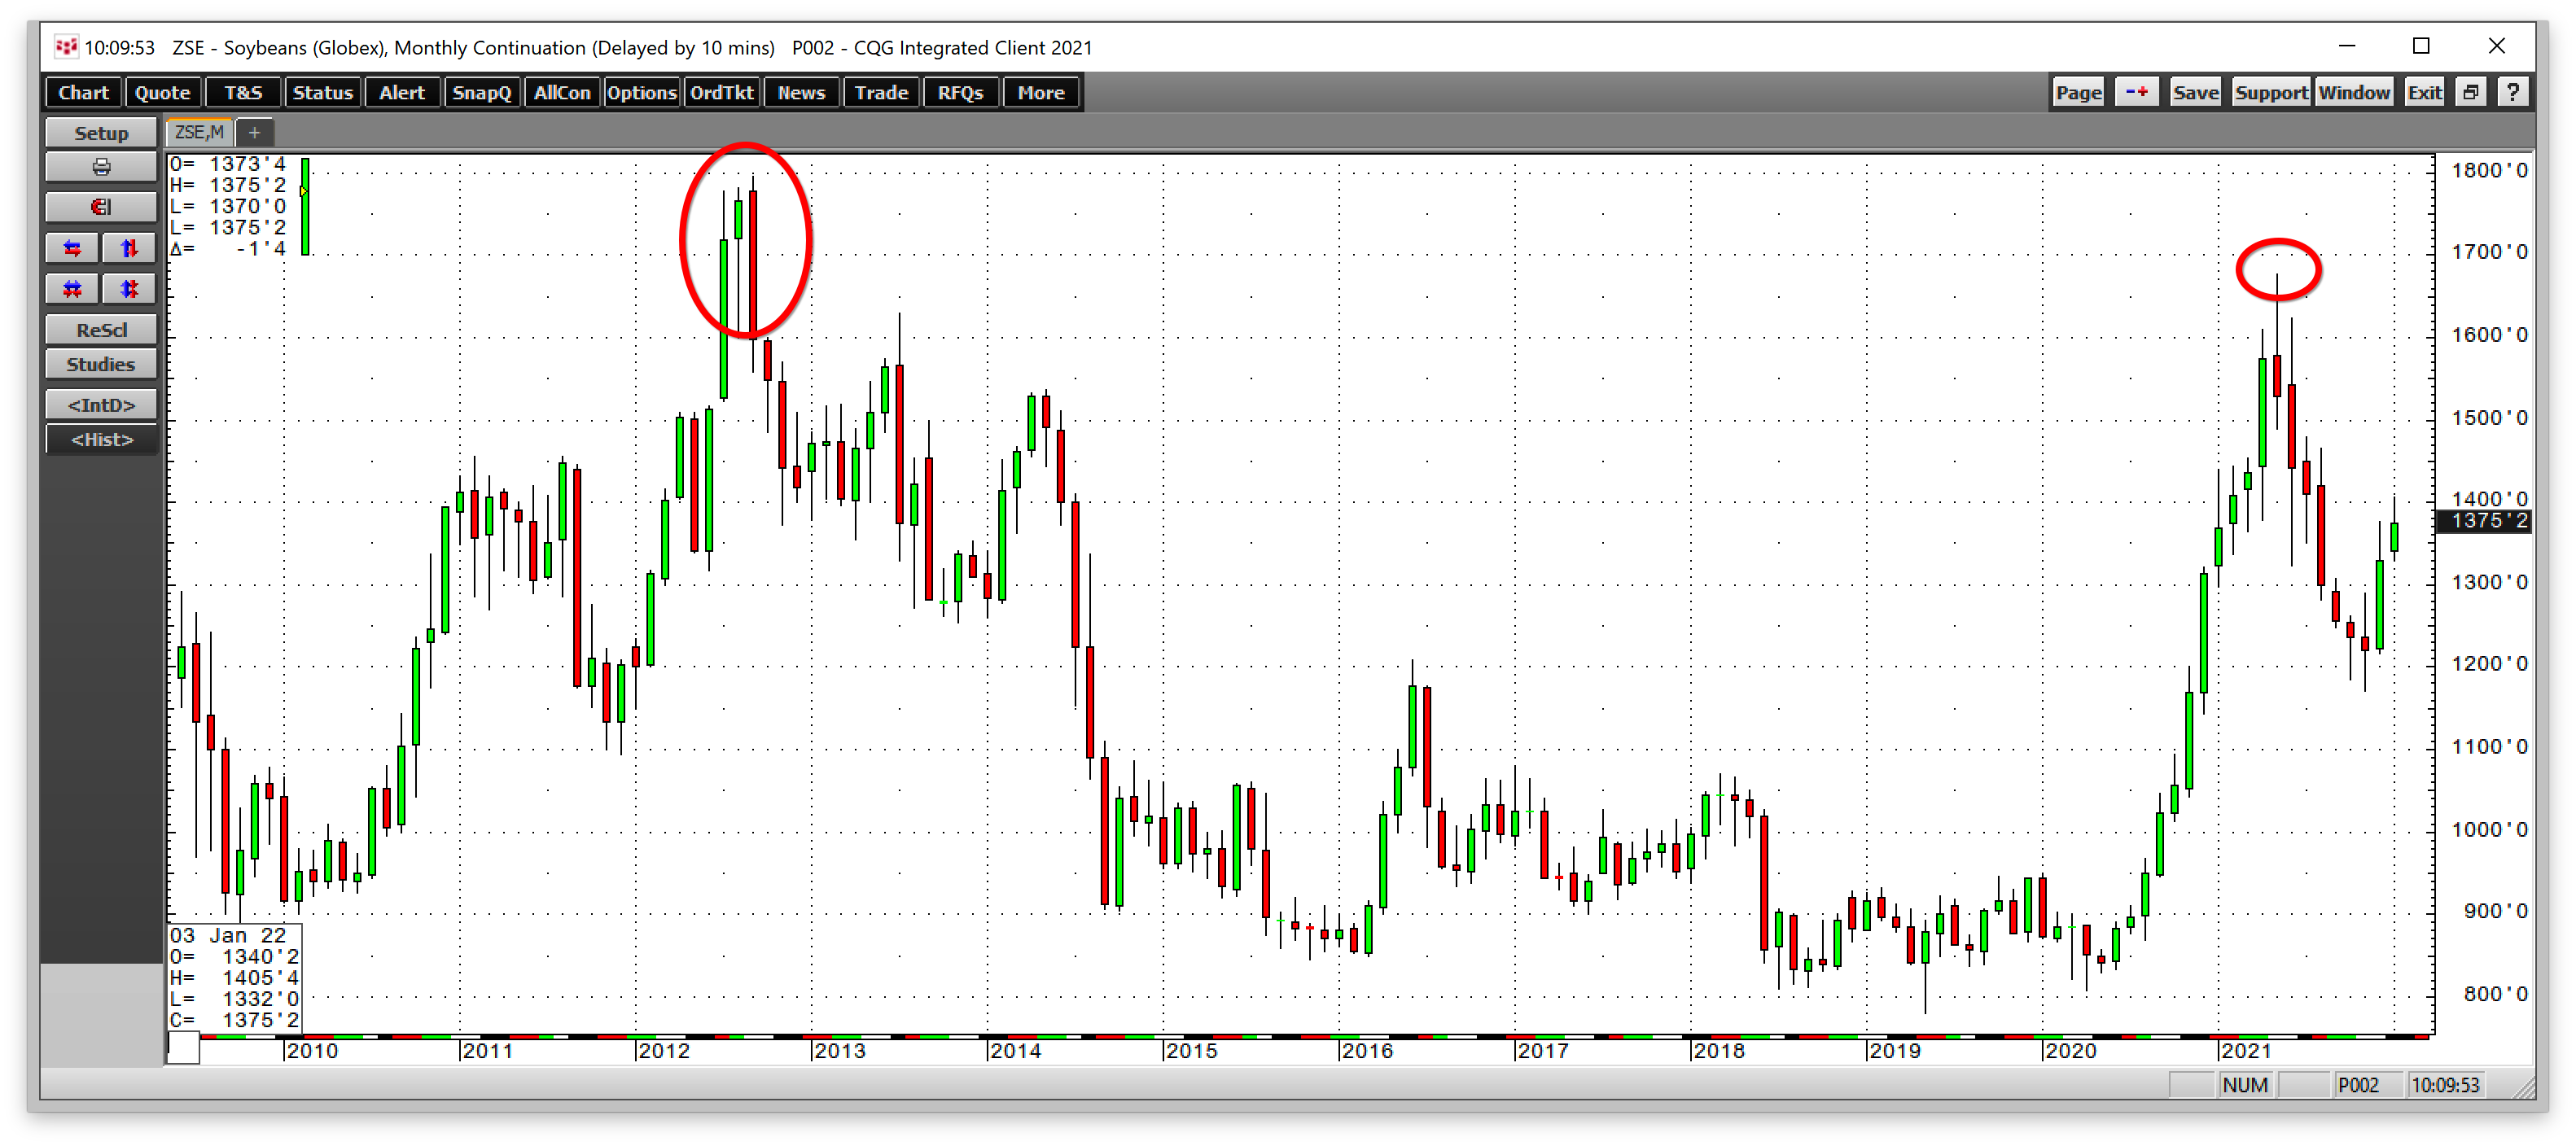 Soybeans Monthly Chart.